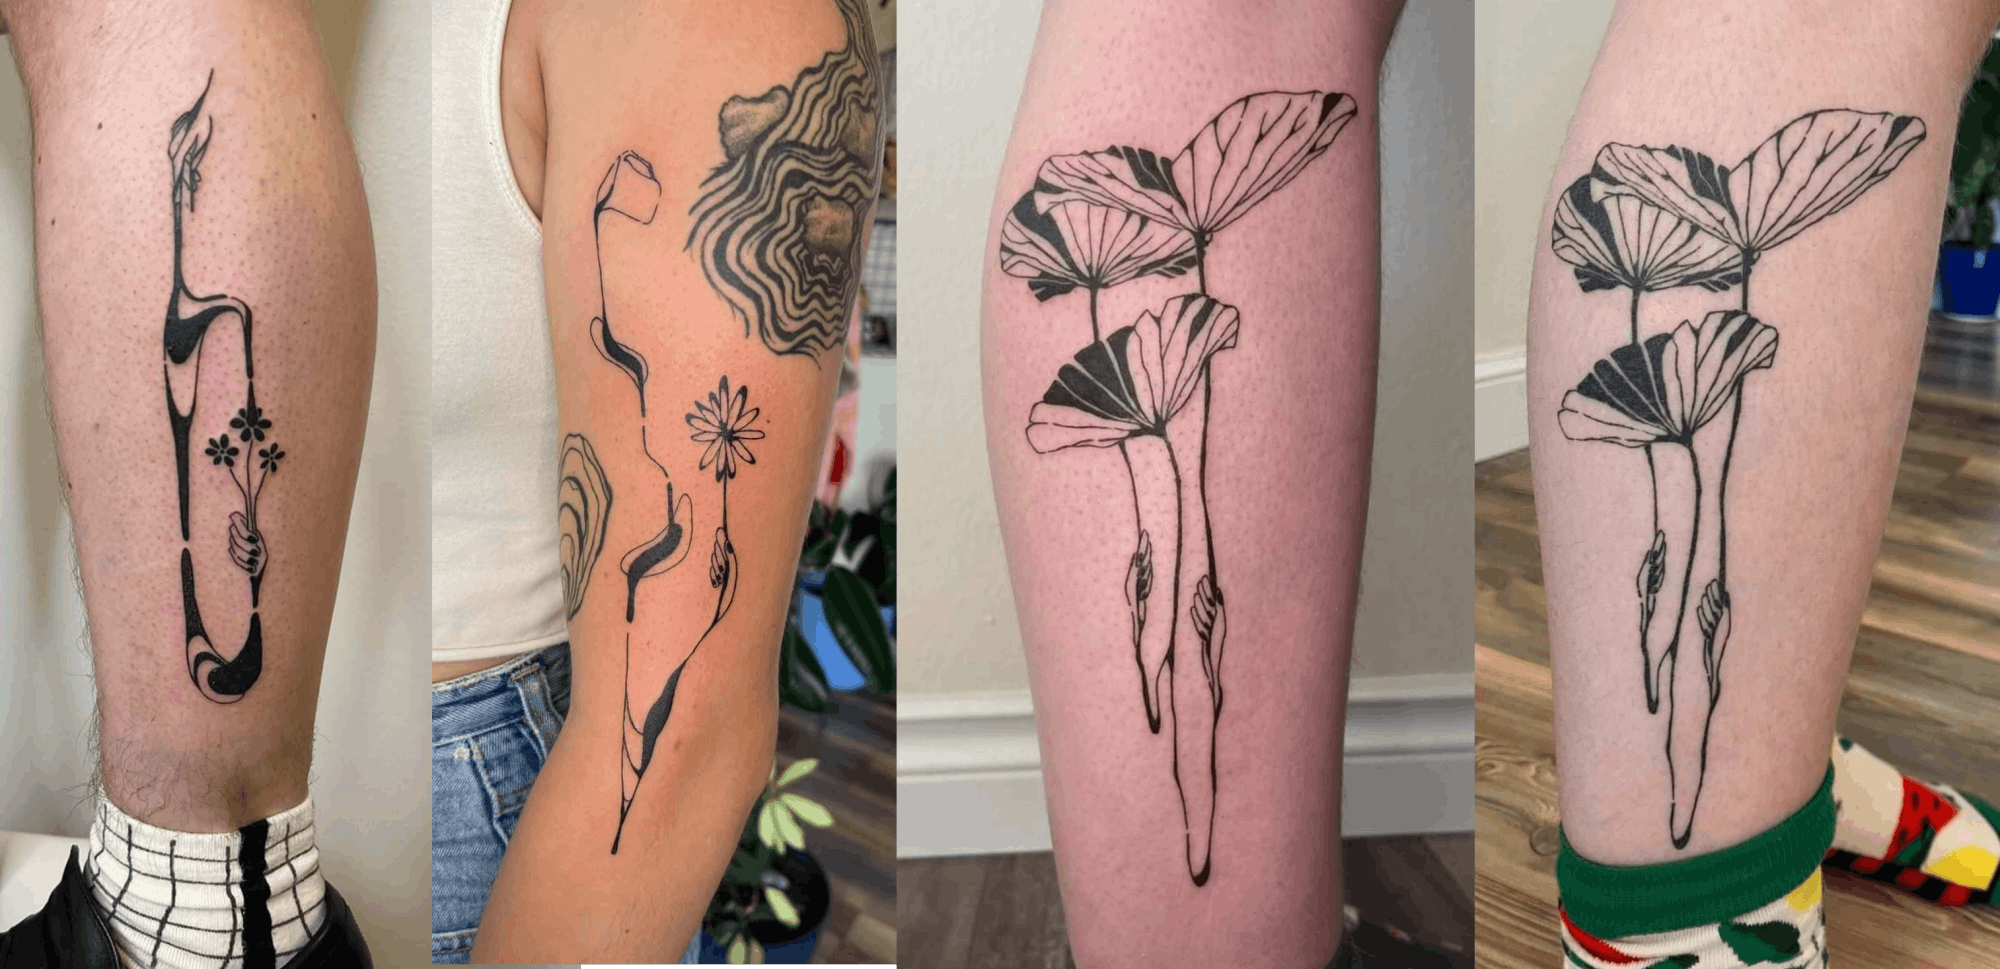 70 Unforgettable Fall Tattoos for the Harvest Season | Art and Design